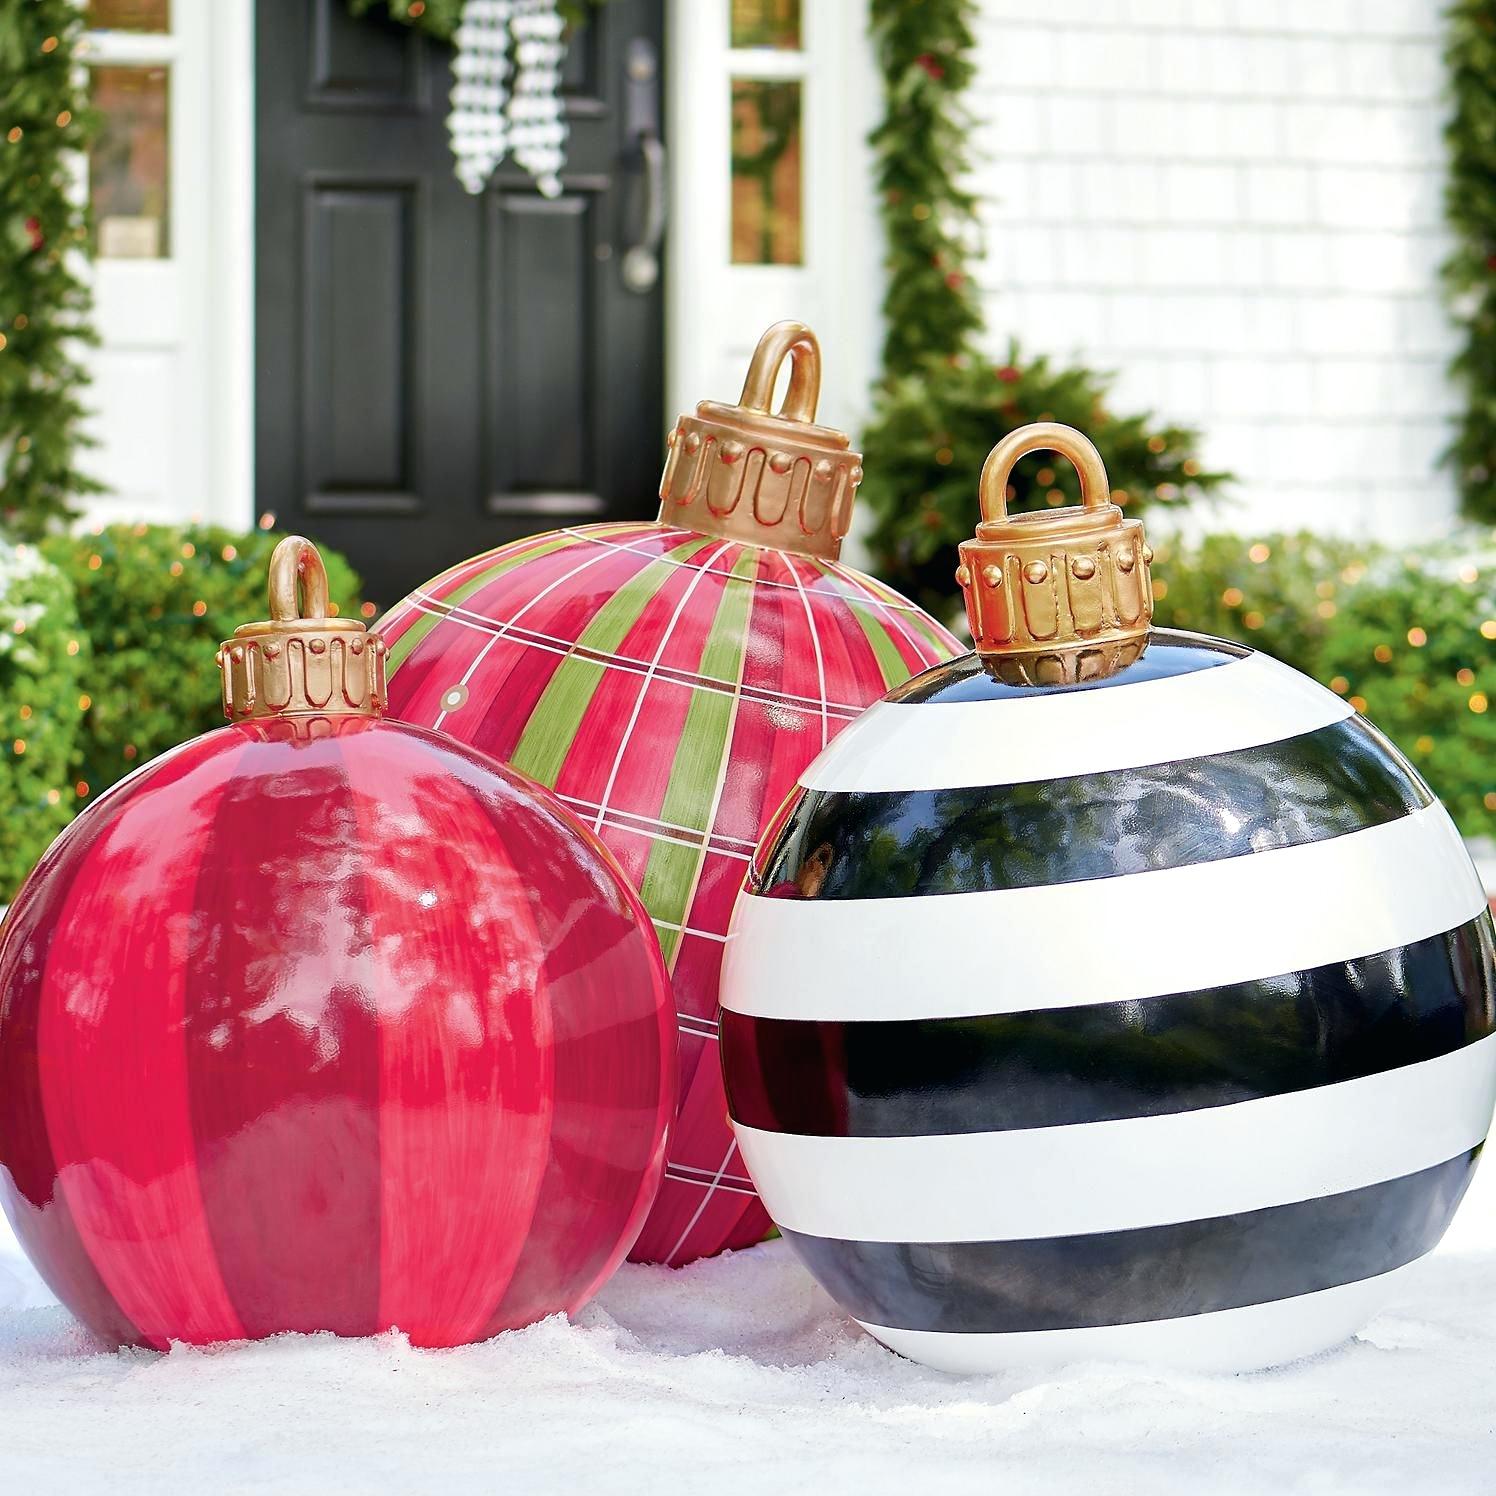 How To Make Large Outdoor Ornaments